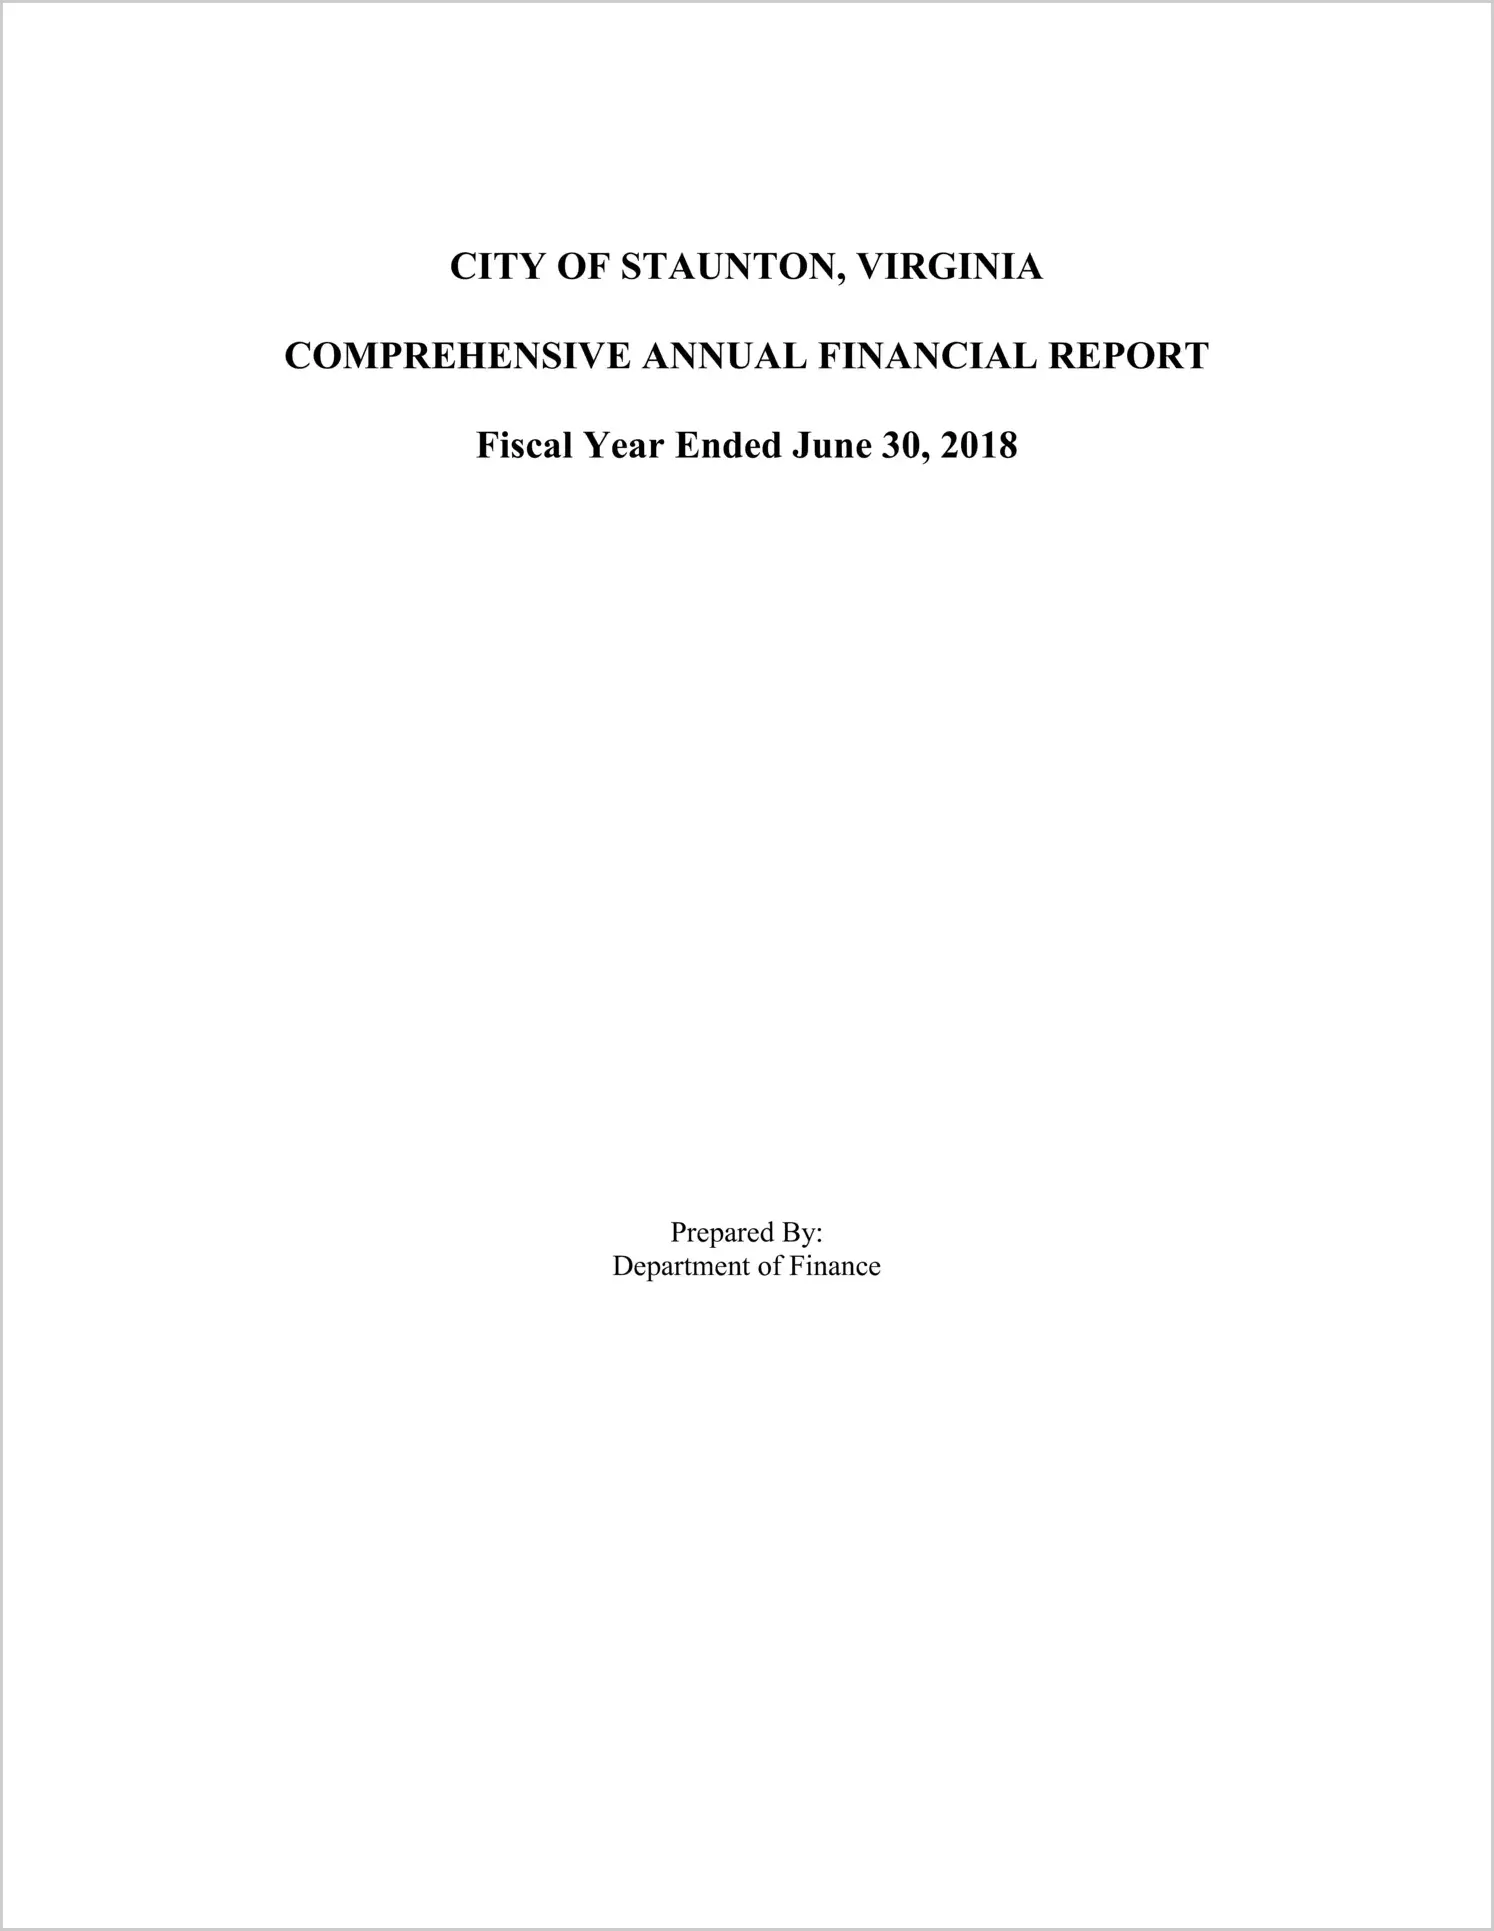 2018 Annual Financial Report for City of Staunton